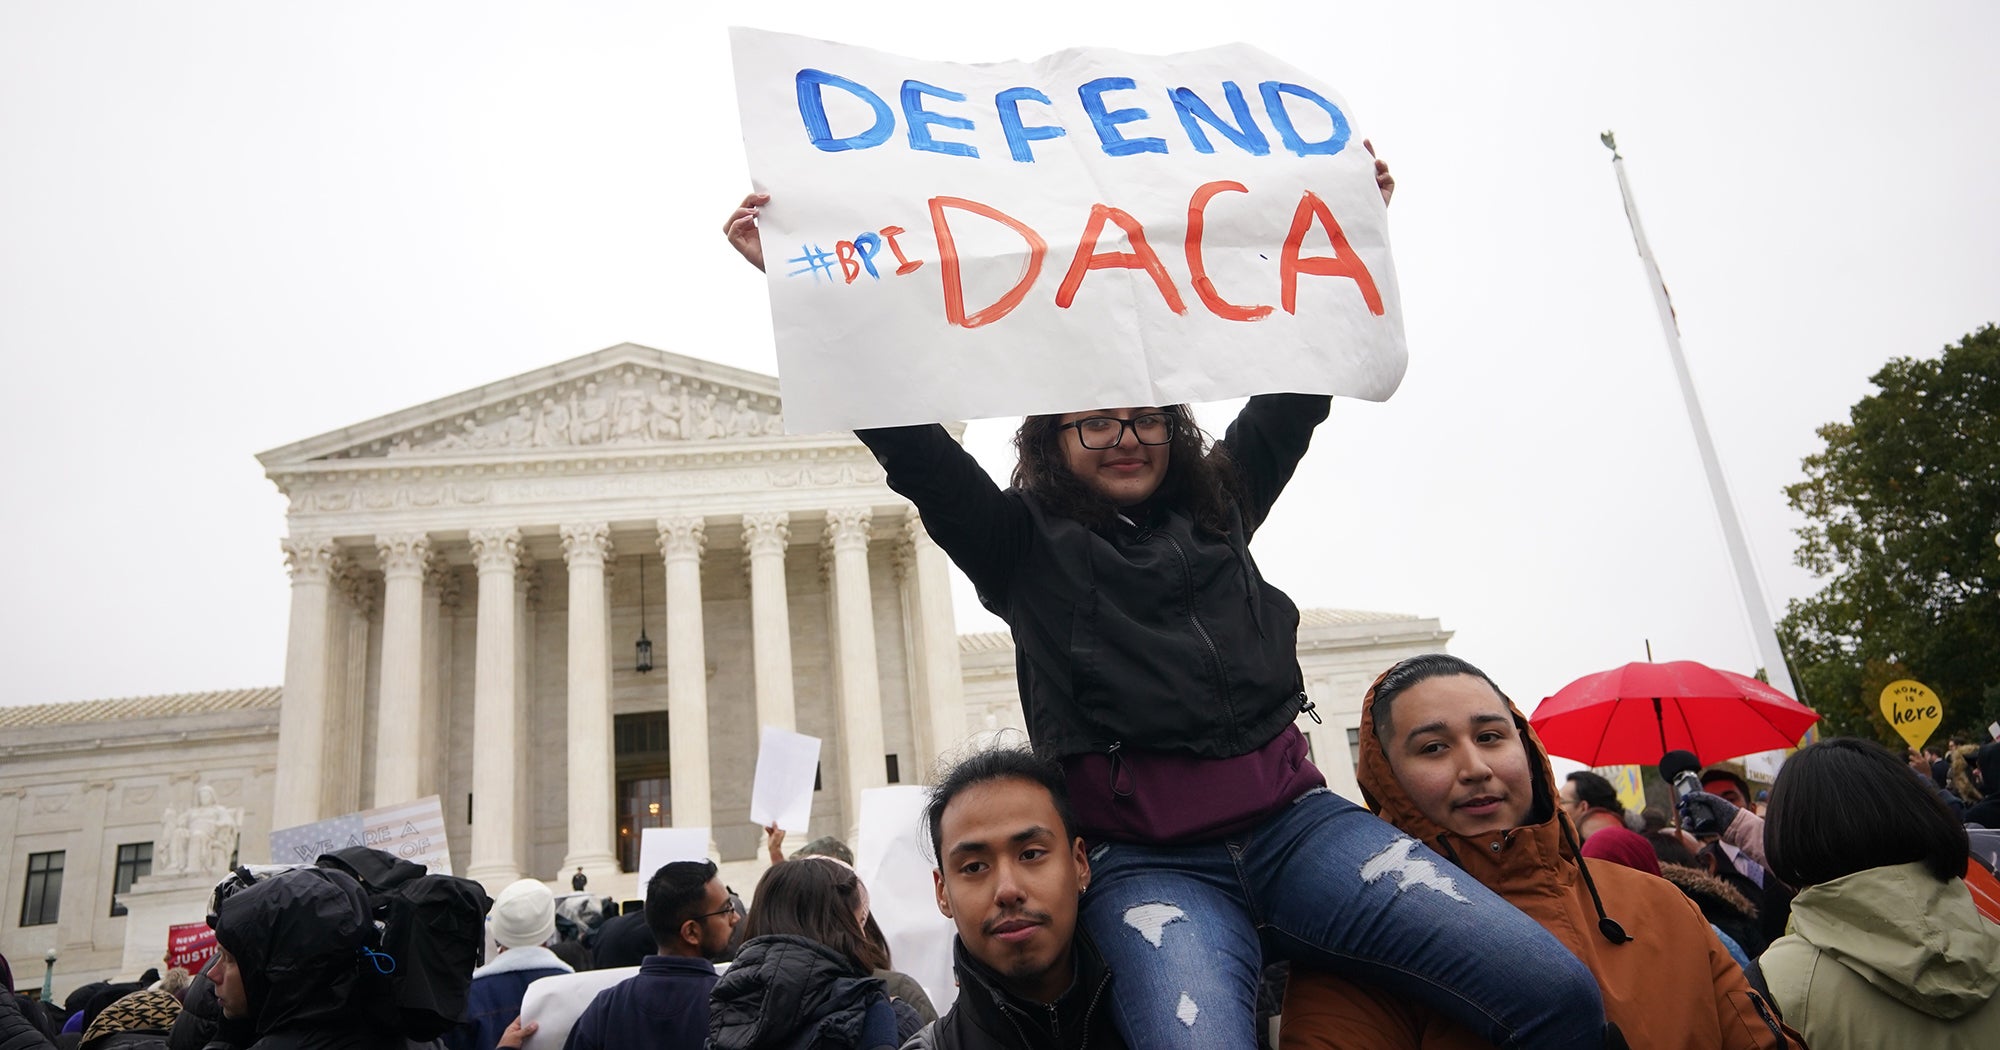 DACA Supreme Court Case: Latest News On Dreamers